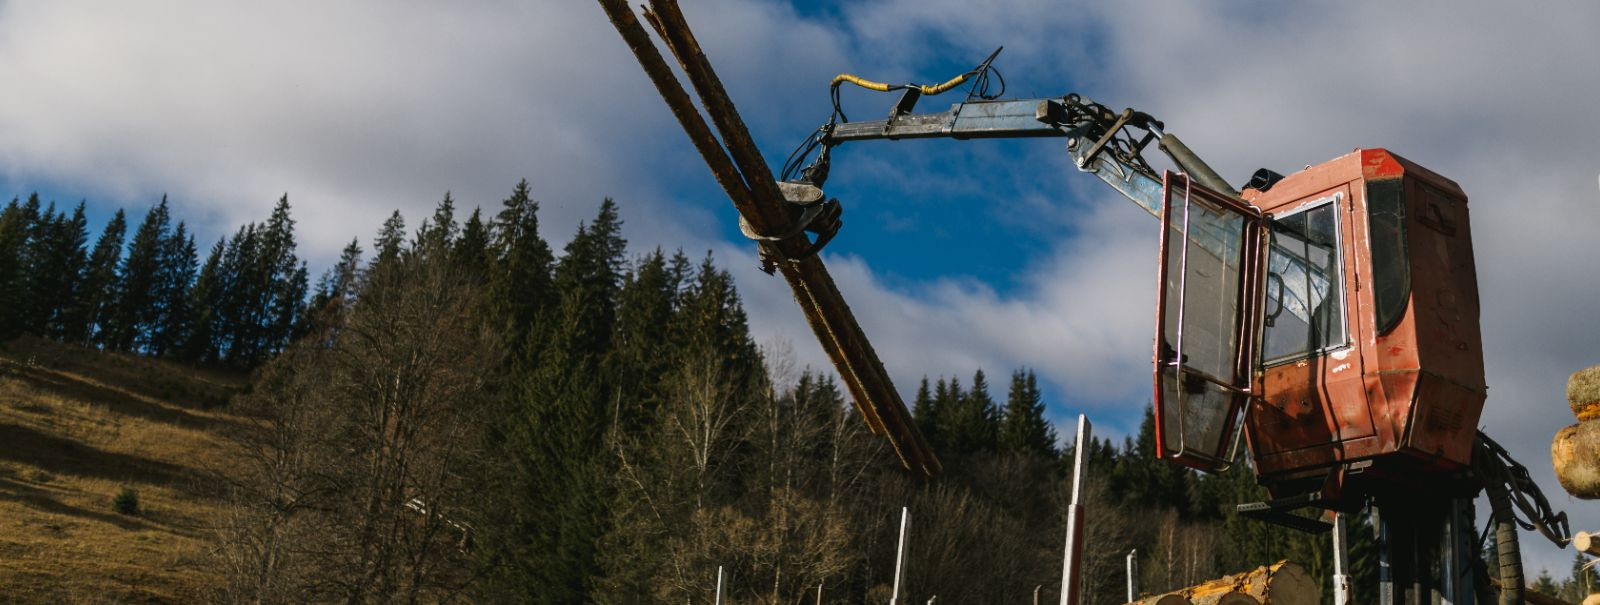 Forestry equipment is the backbone of any forestry operation. It enables professionals to manage forests efficiently, ensuring sustainable practices while maxim